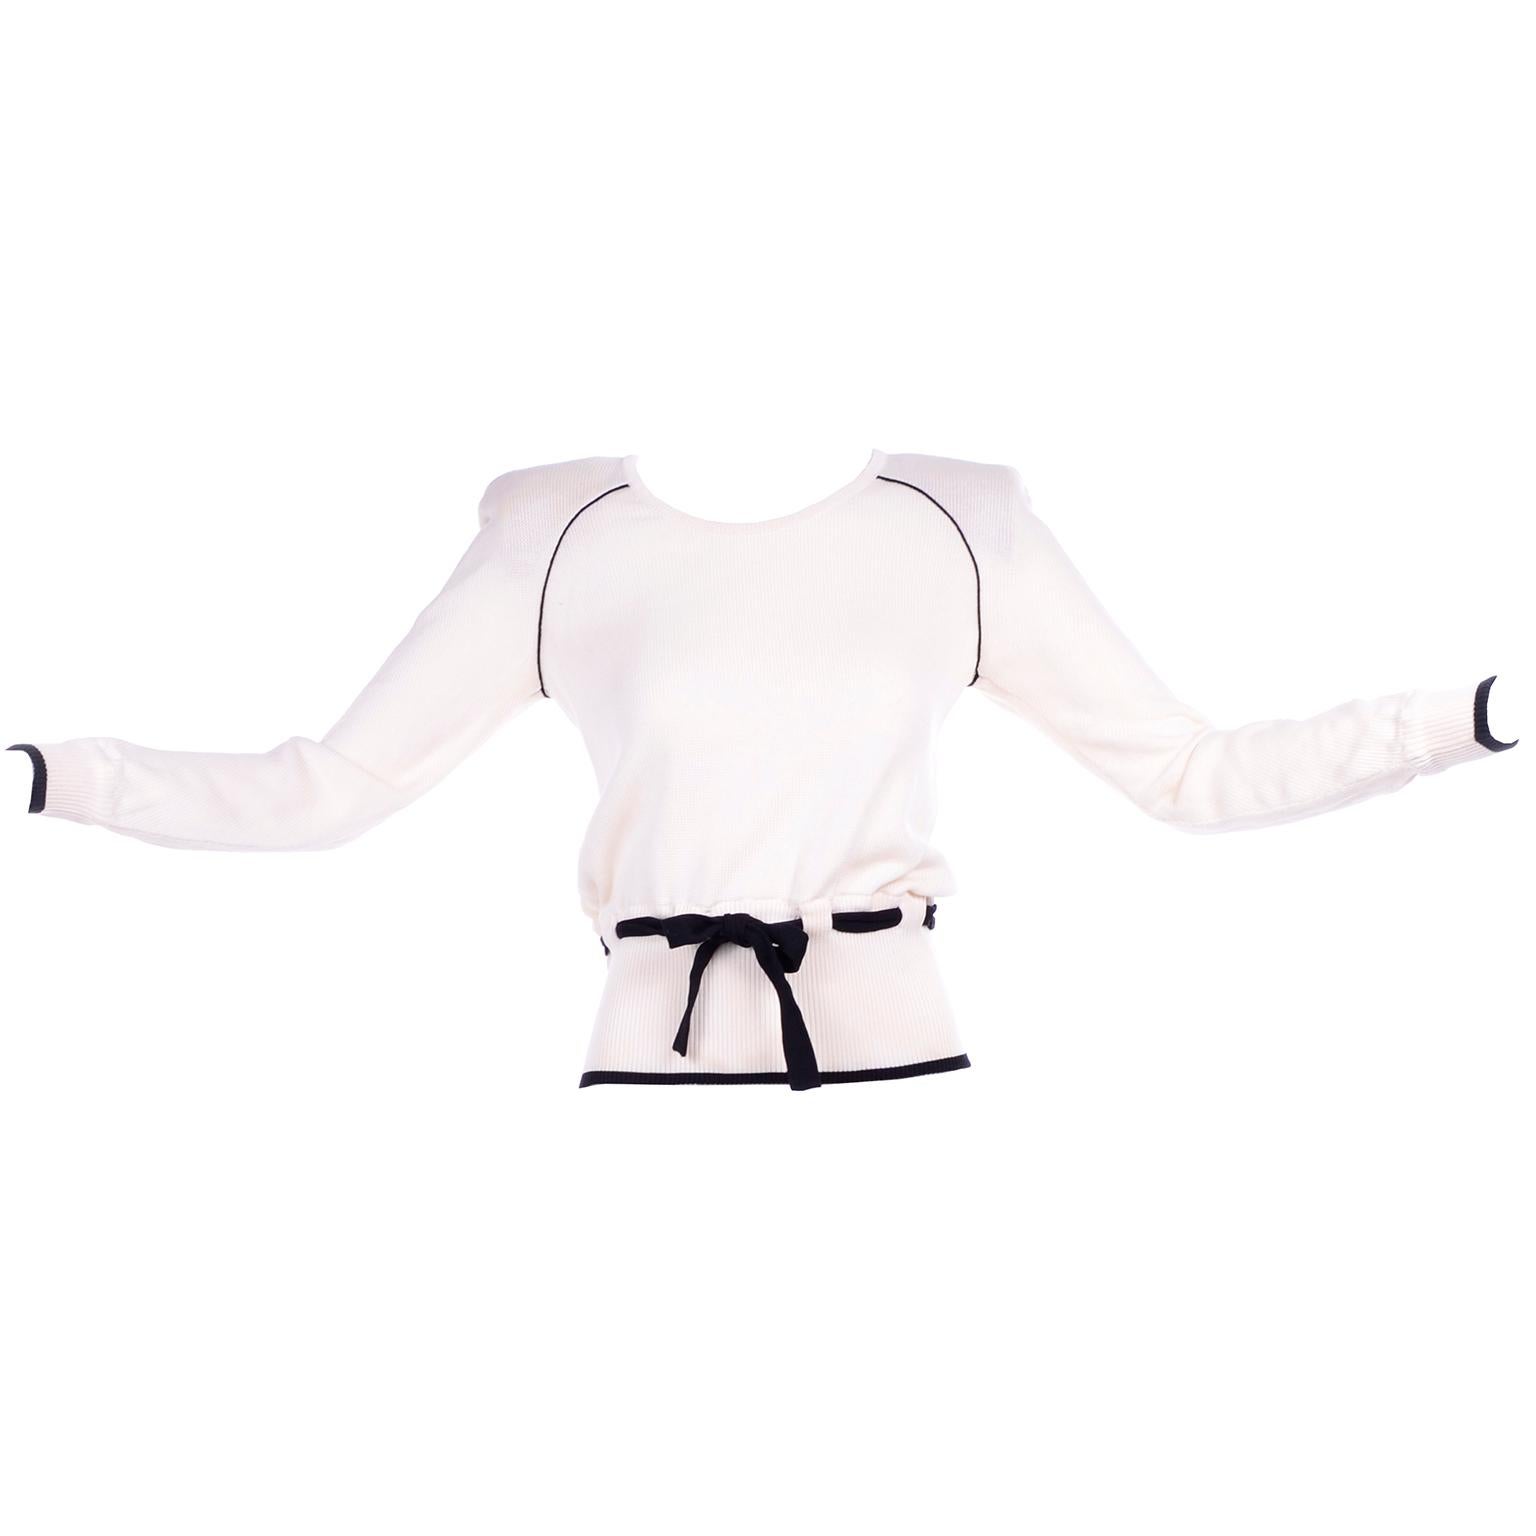 This is a lovely Valentino ivory, almost white cotton sweater with black trim along the hem, cuffs, and raglan sleeve seam, as well as a black waist tie. The waist tie goes through loops and is adjustable. It has sewn in shoulder pads that can be